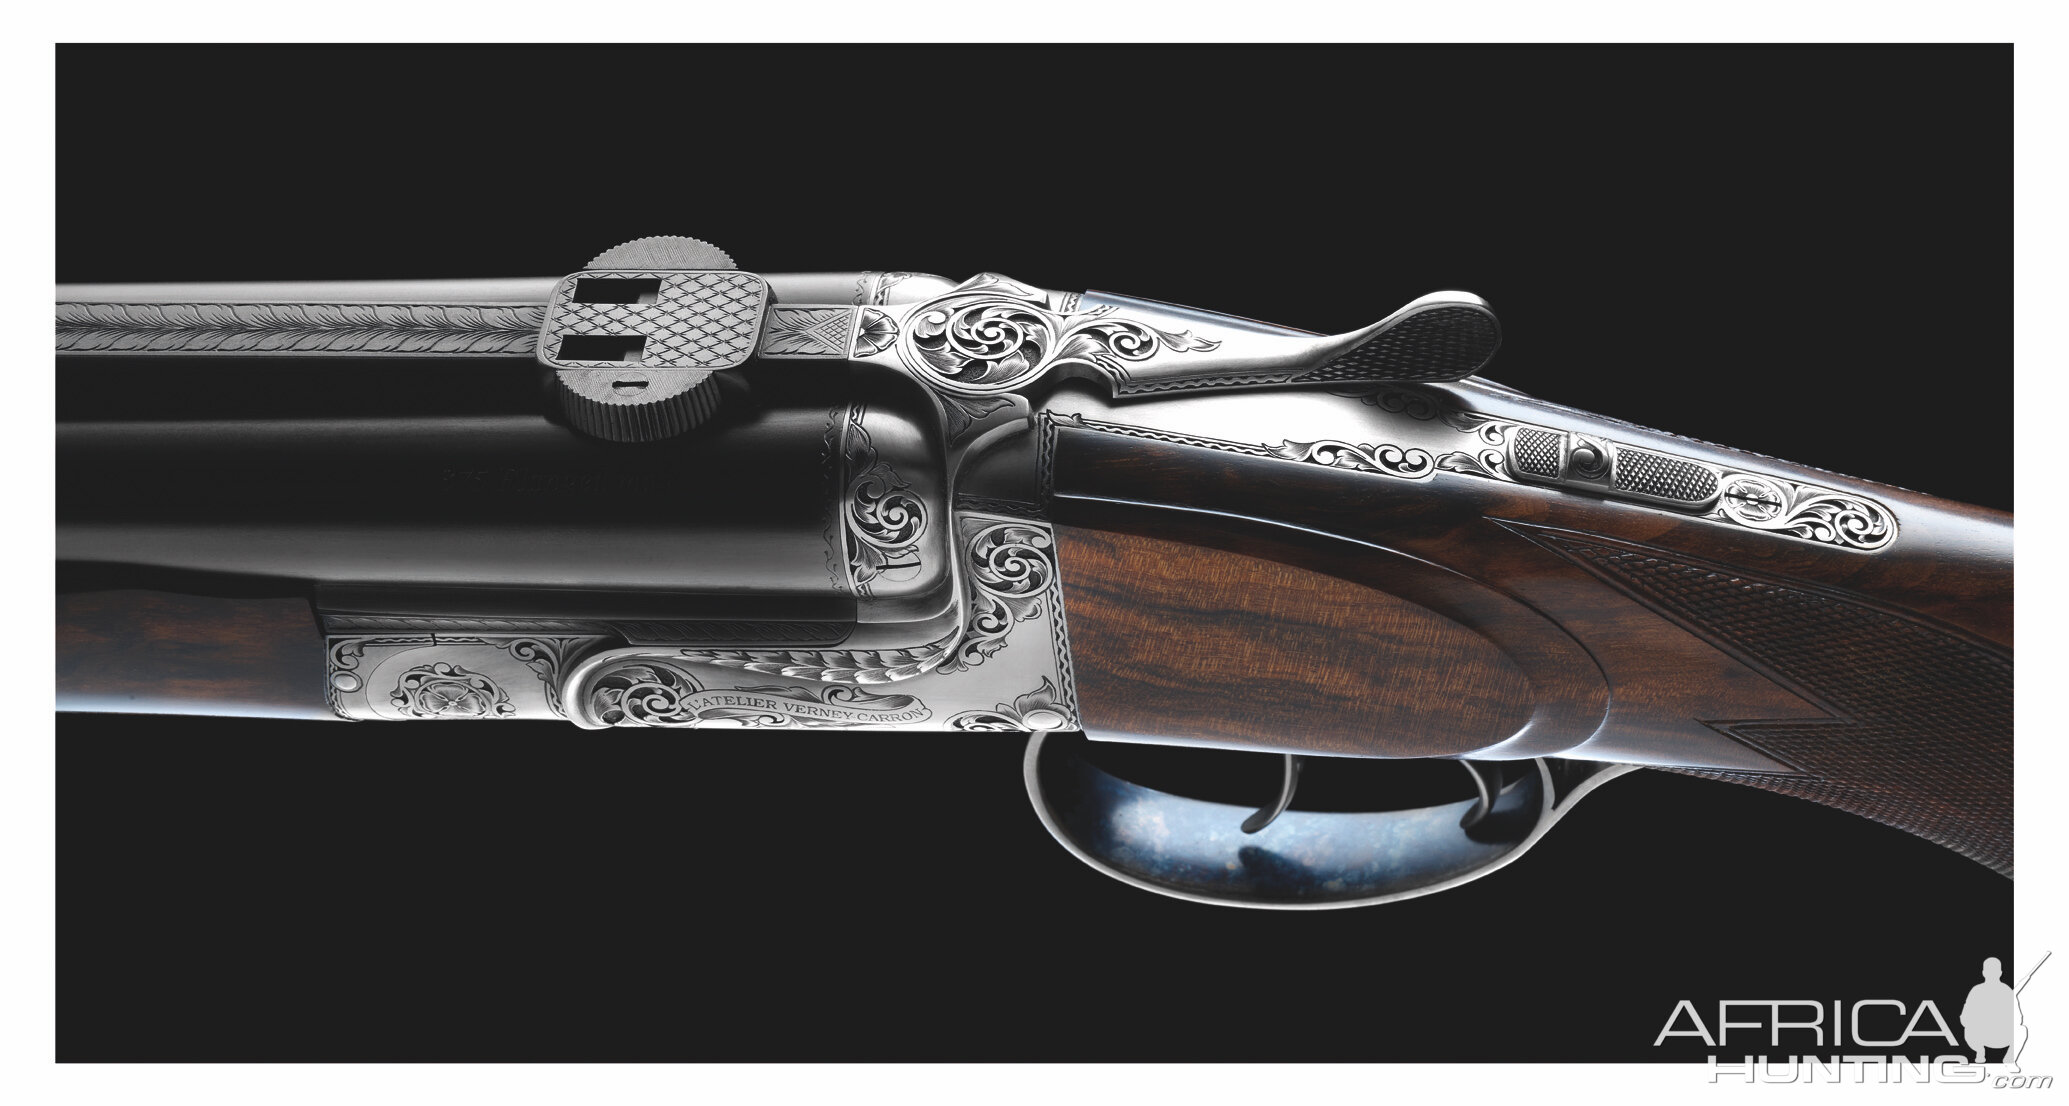 Tailor-made Rifles from L'Atelier Verney-Carron